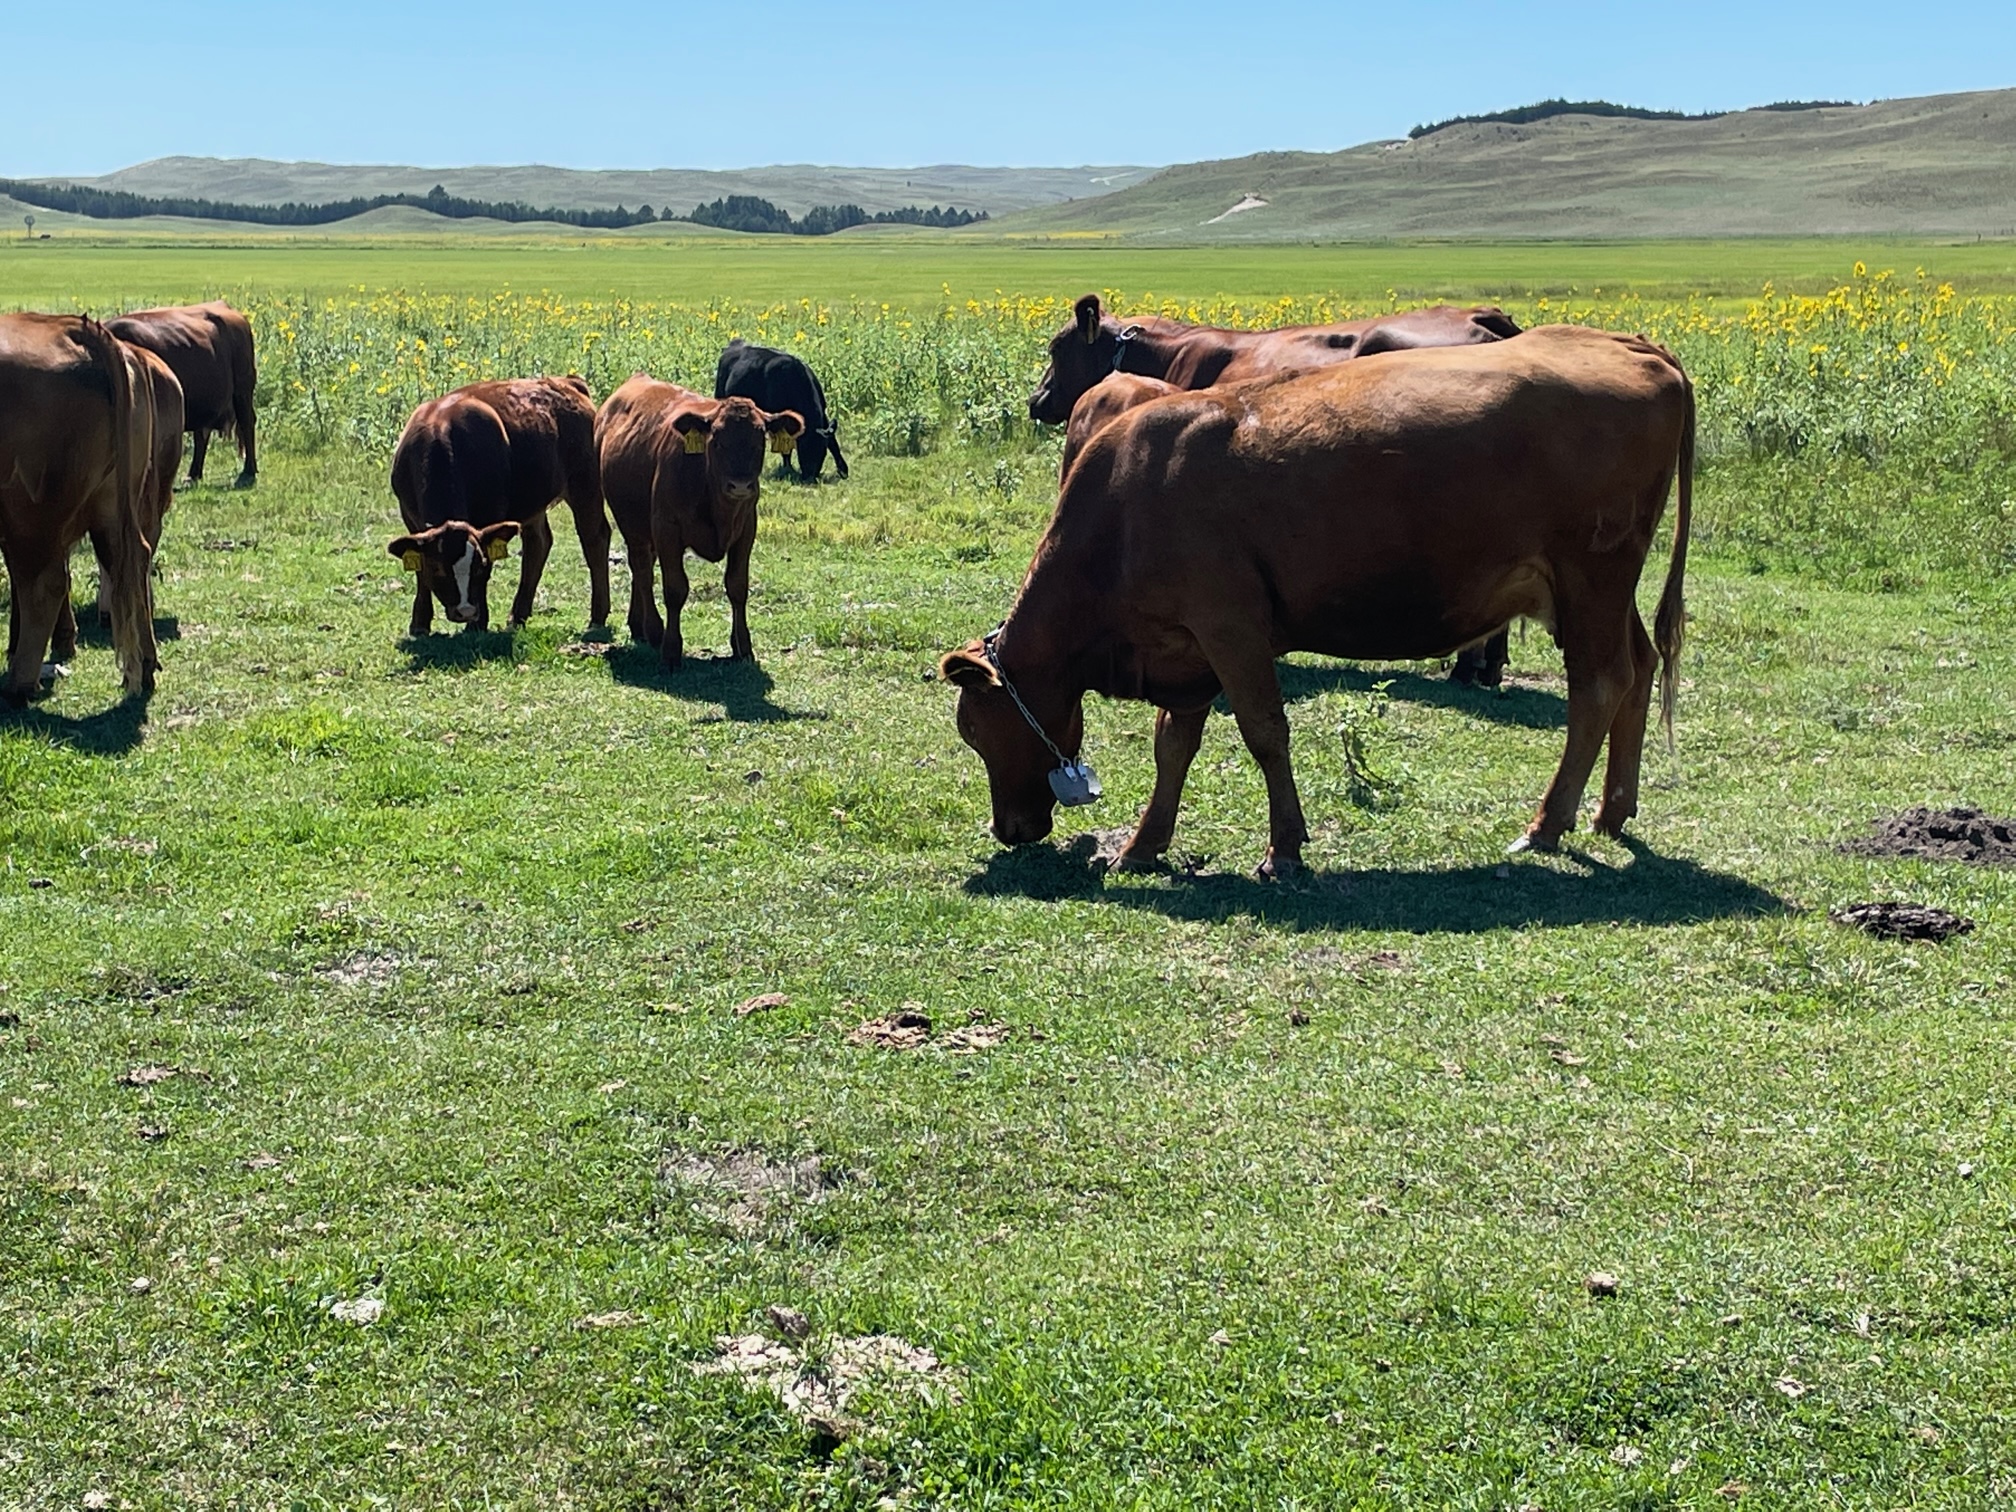 Cattle fitted with virtual fencing collars graze on the Nebraska landscape